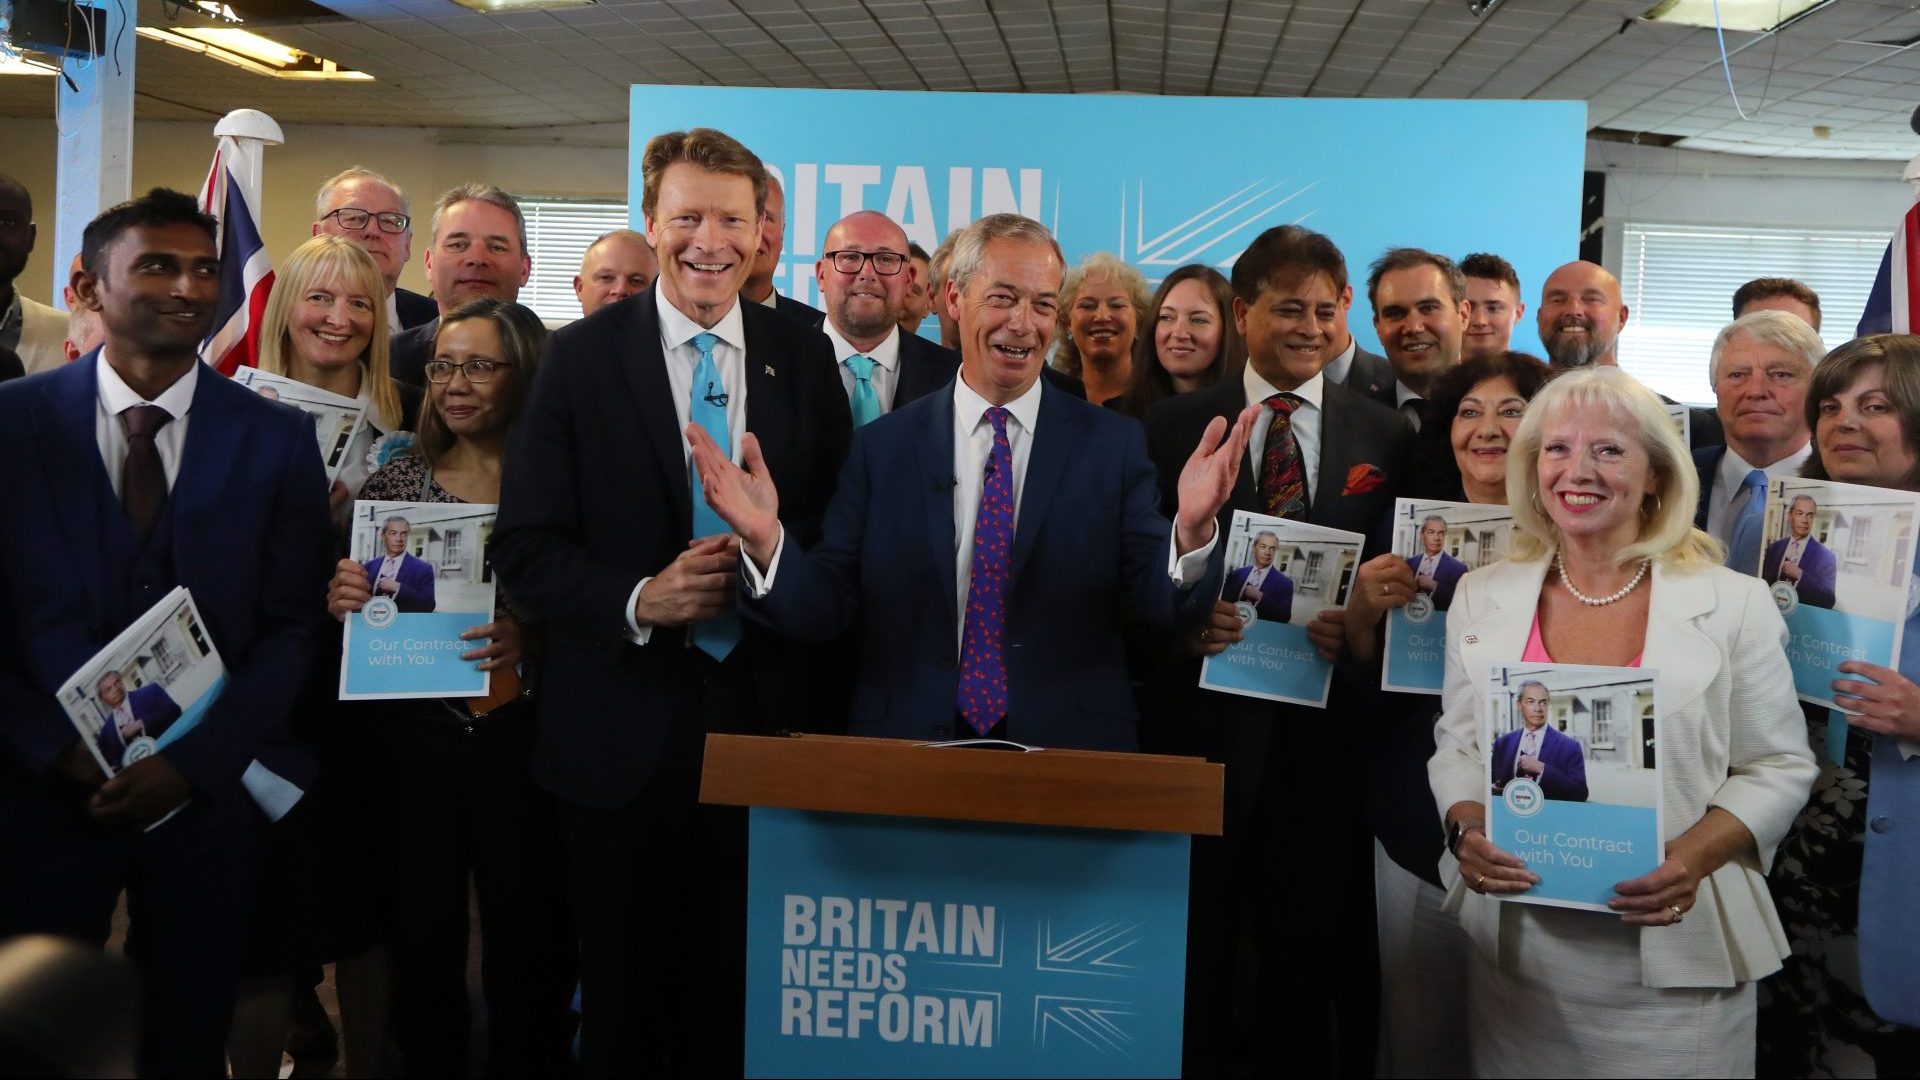 Reform UK launches its 'Our Contract with You' general election manifesto (Photo by Geoff Caddick/Getty Images)